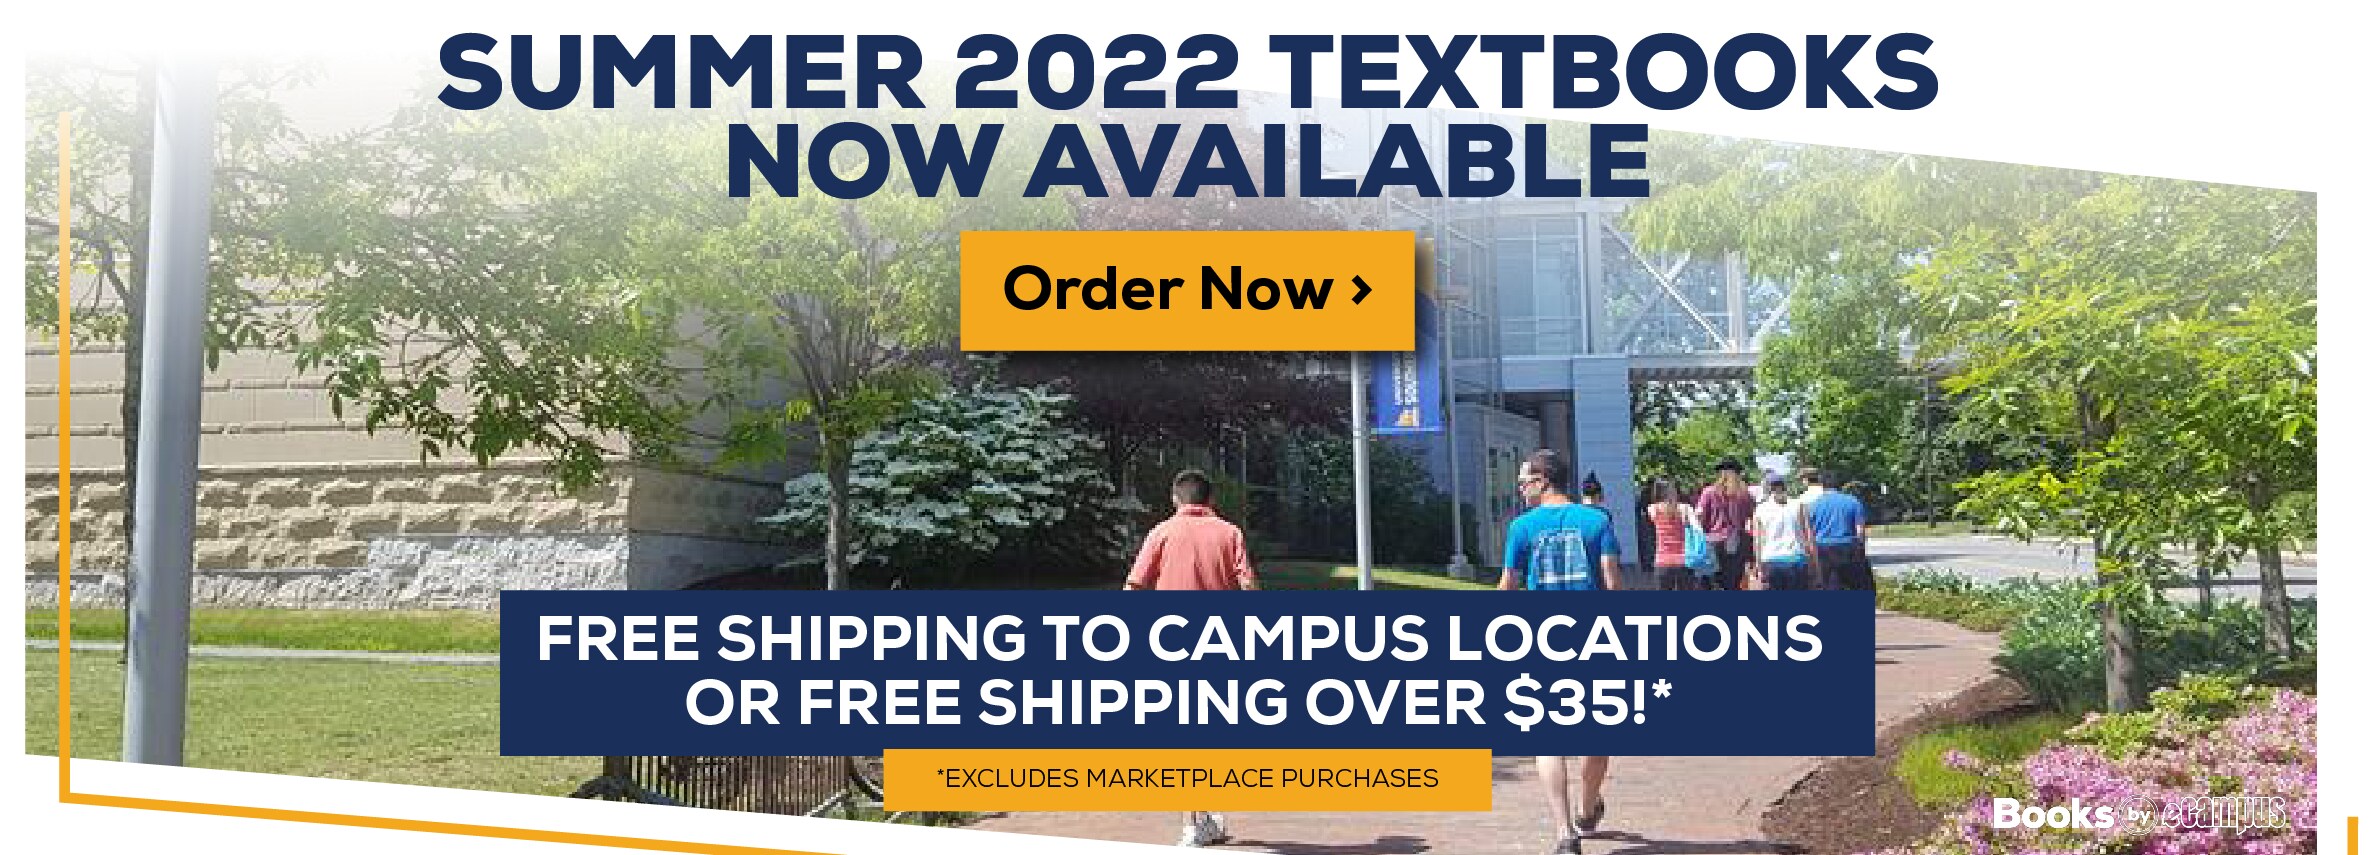 Summer 2022 Textbooks now available order now Free shipping ot campus or free shipping over $35